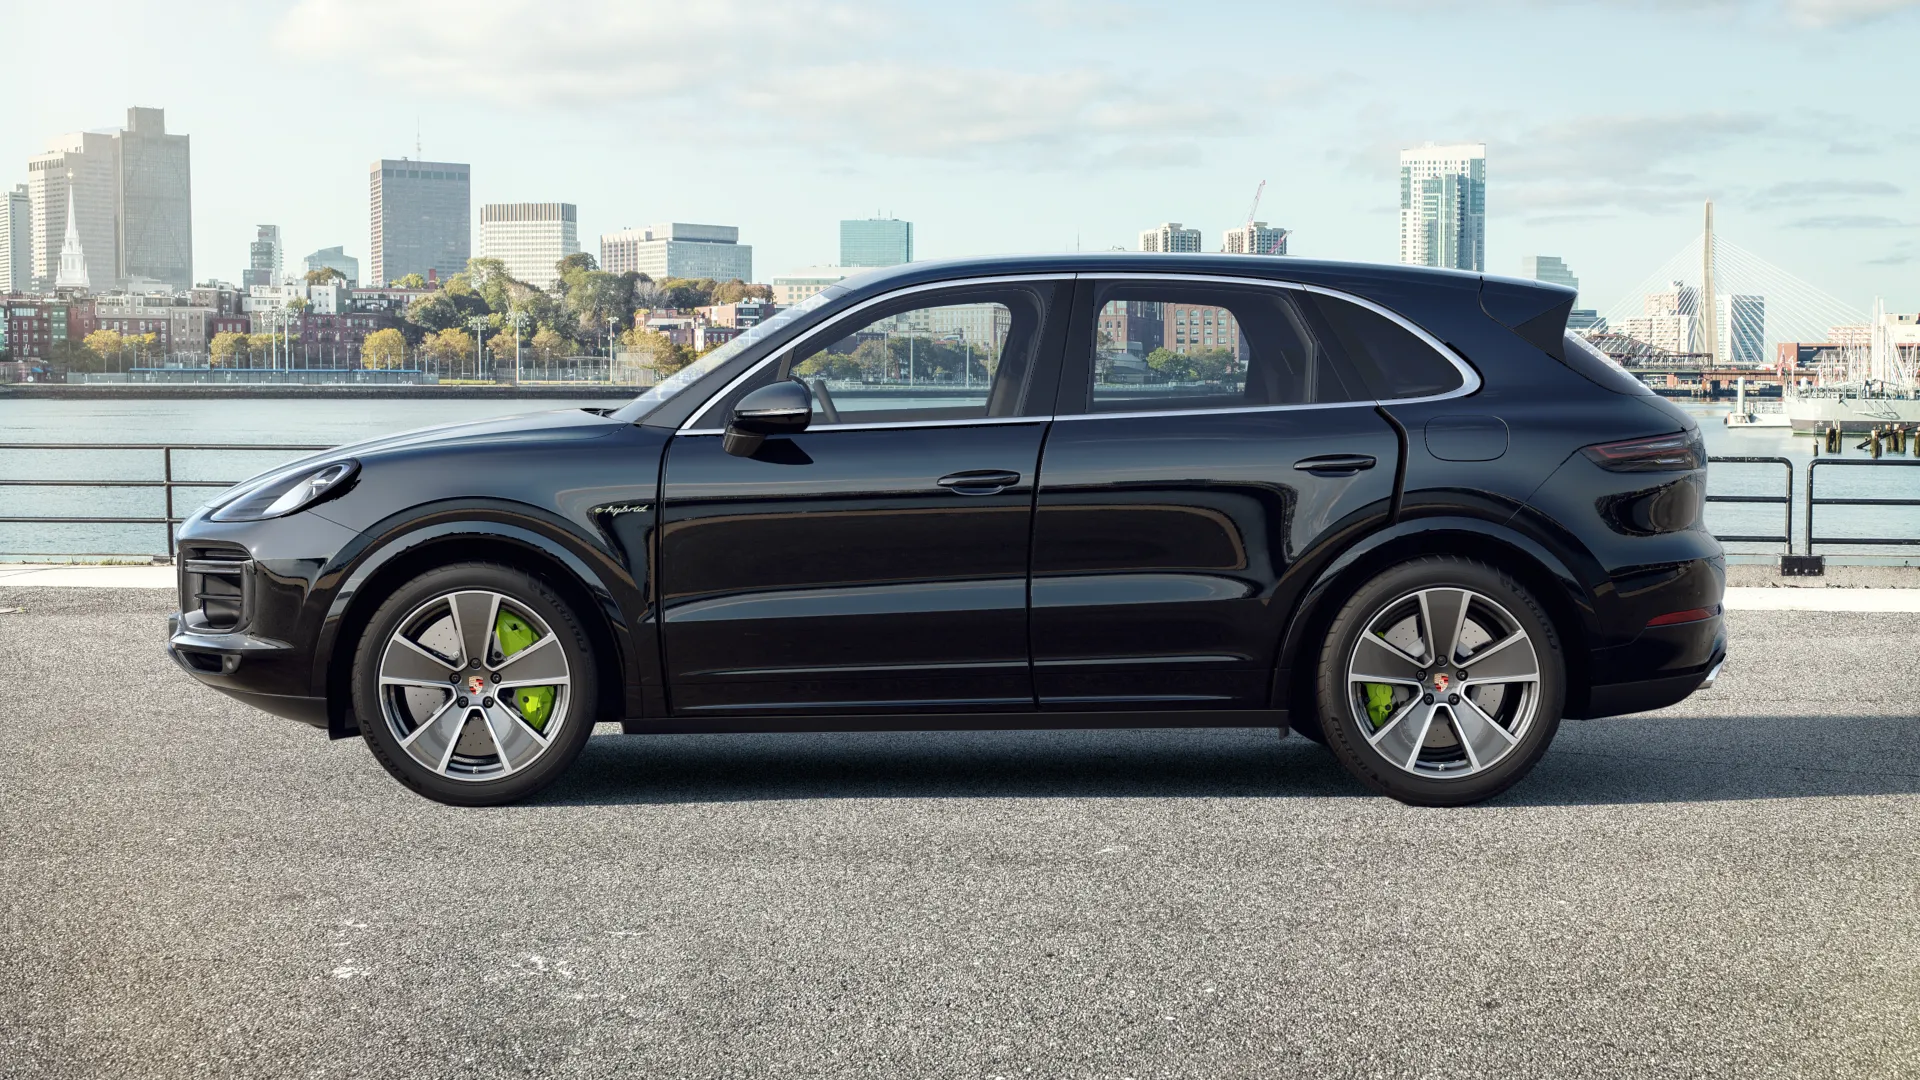 Exterior view of Cayenne Turbo S E-Hybrid